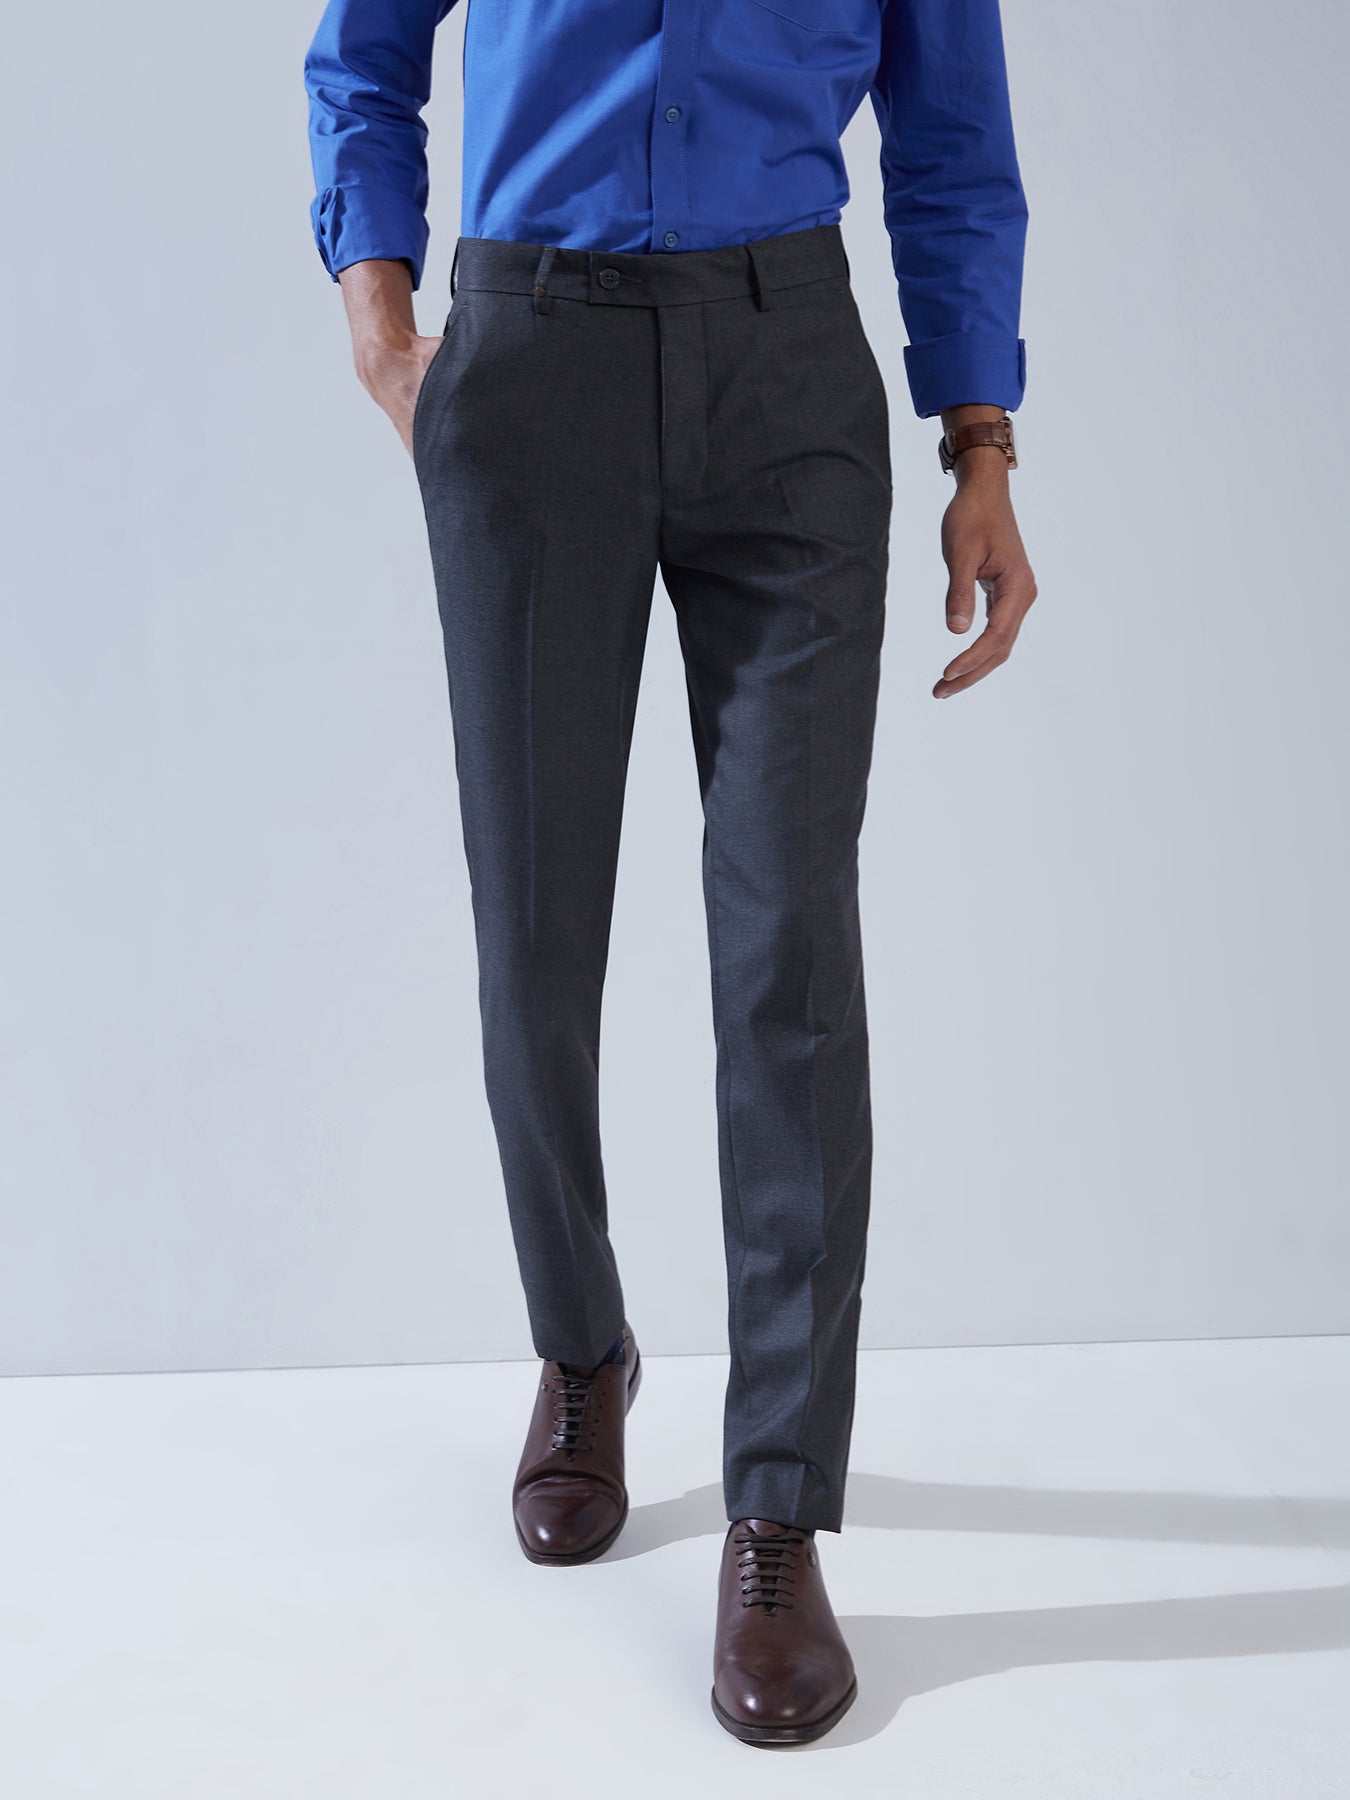 Jeans & Pants | (Navy Blue) Formal Pant For Men's | Freeup